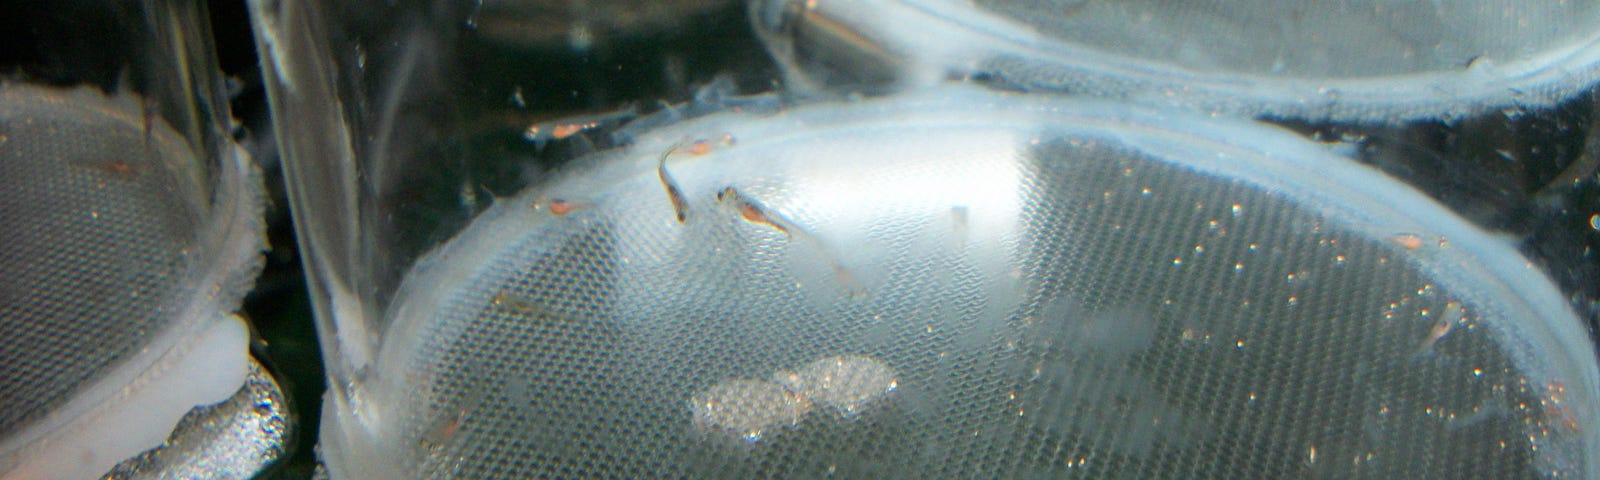 Baby fathead minnows in containers in a lab.